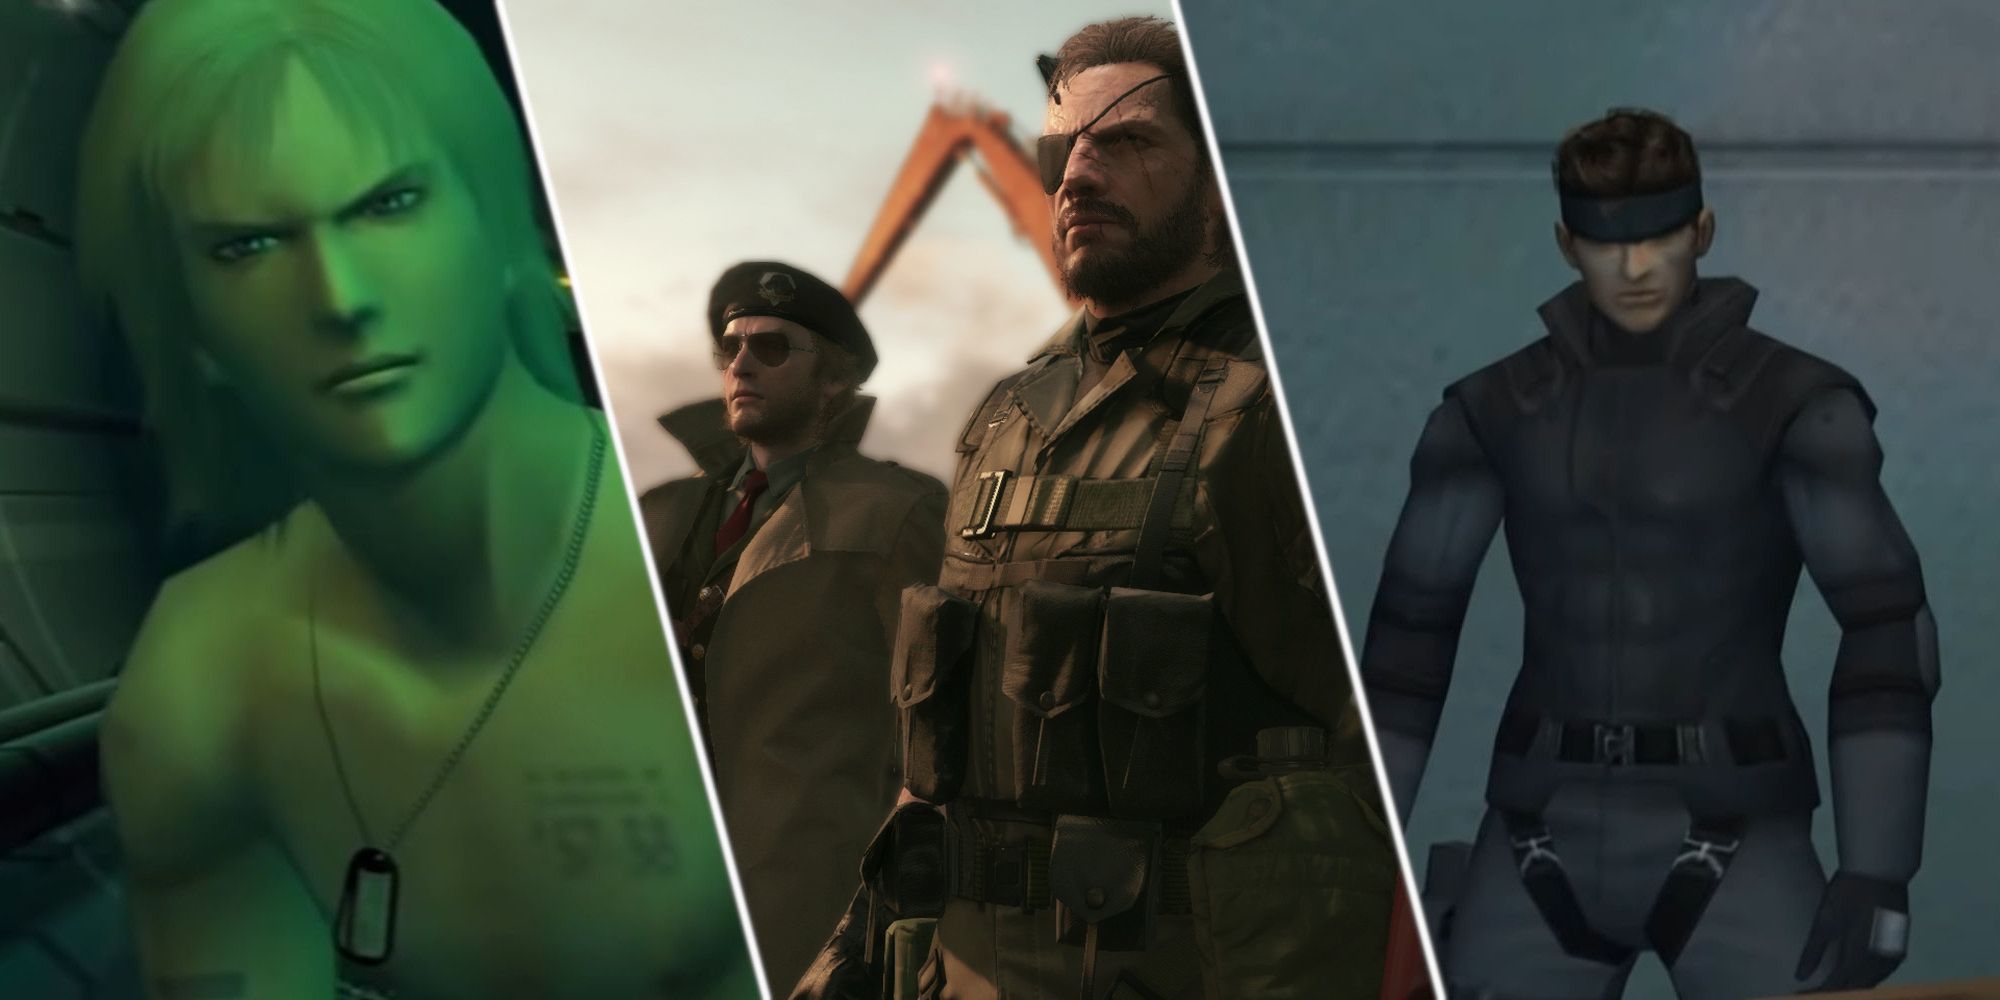 A composite image of protagonists of Metal Gear Solid games